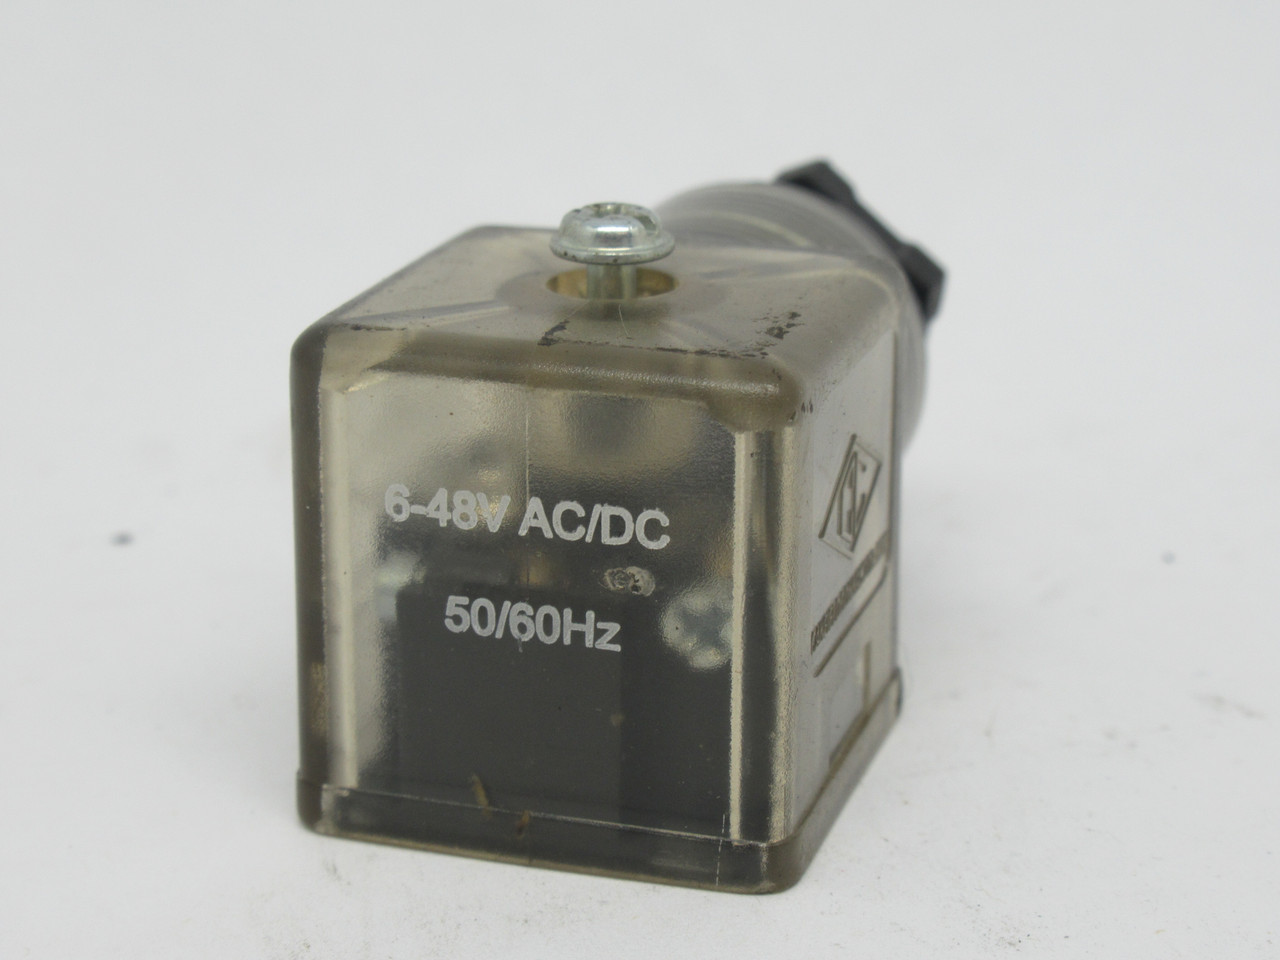 Canfield 5103-1090000 Solenoid Connector 6-48V AC/DC 50/60Hz USED